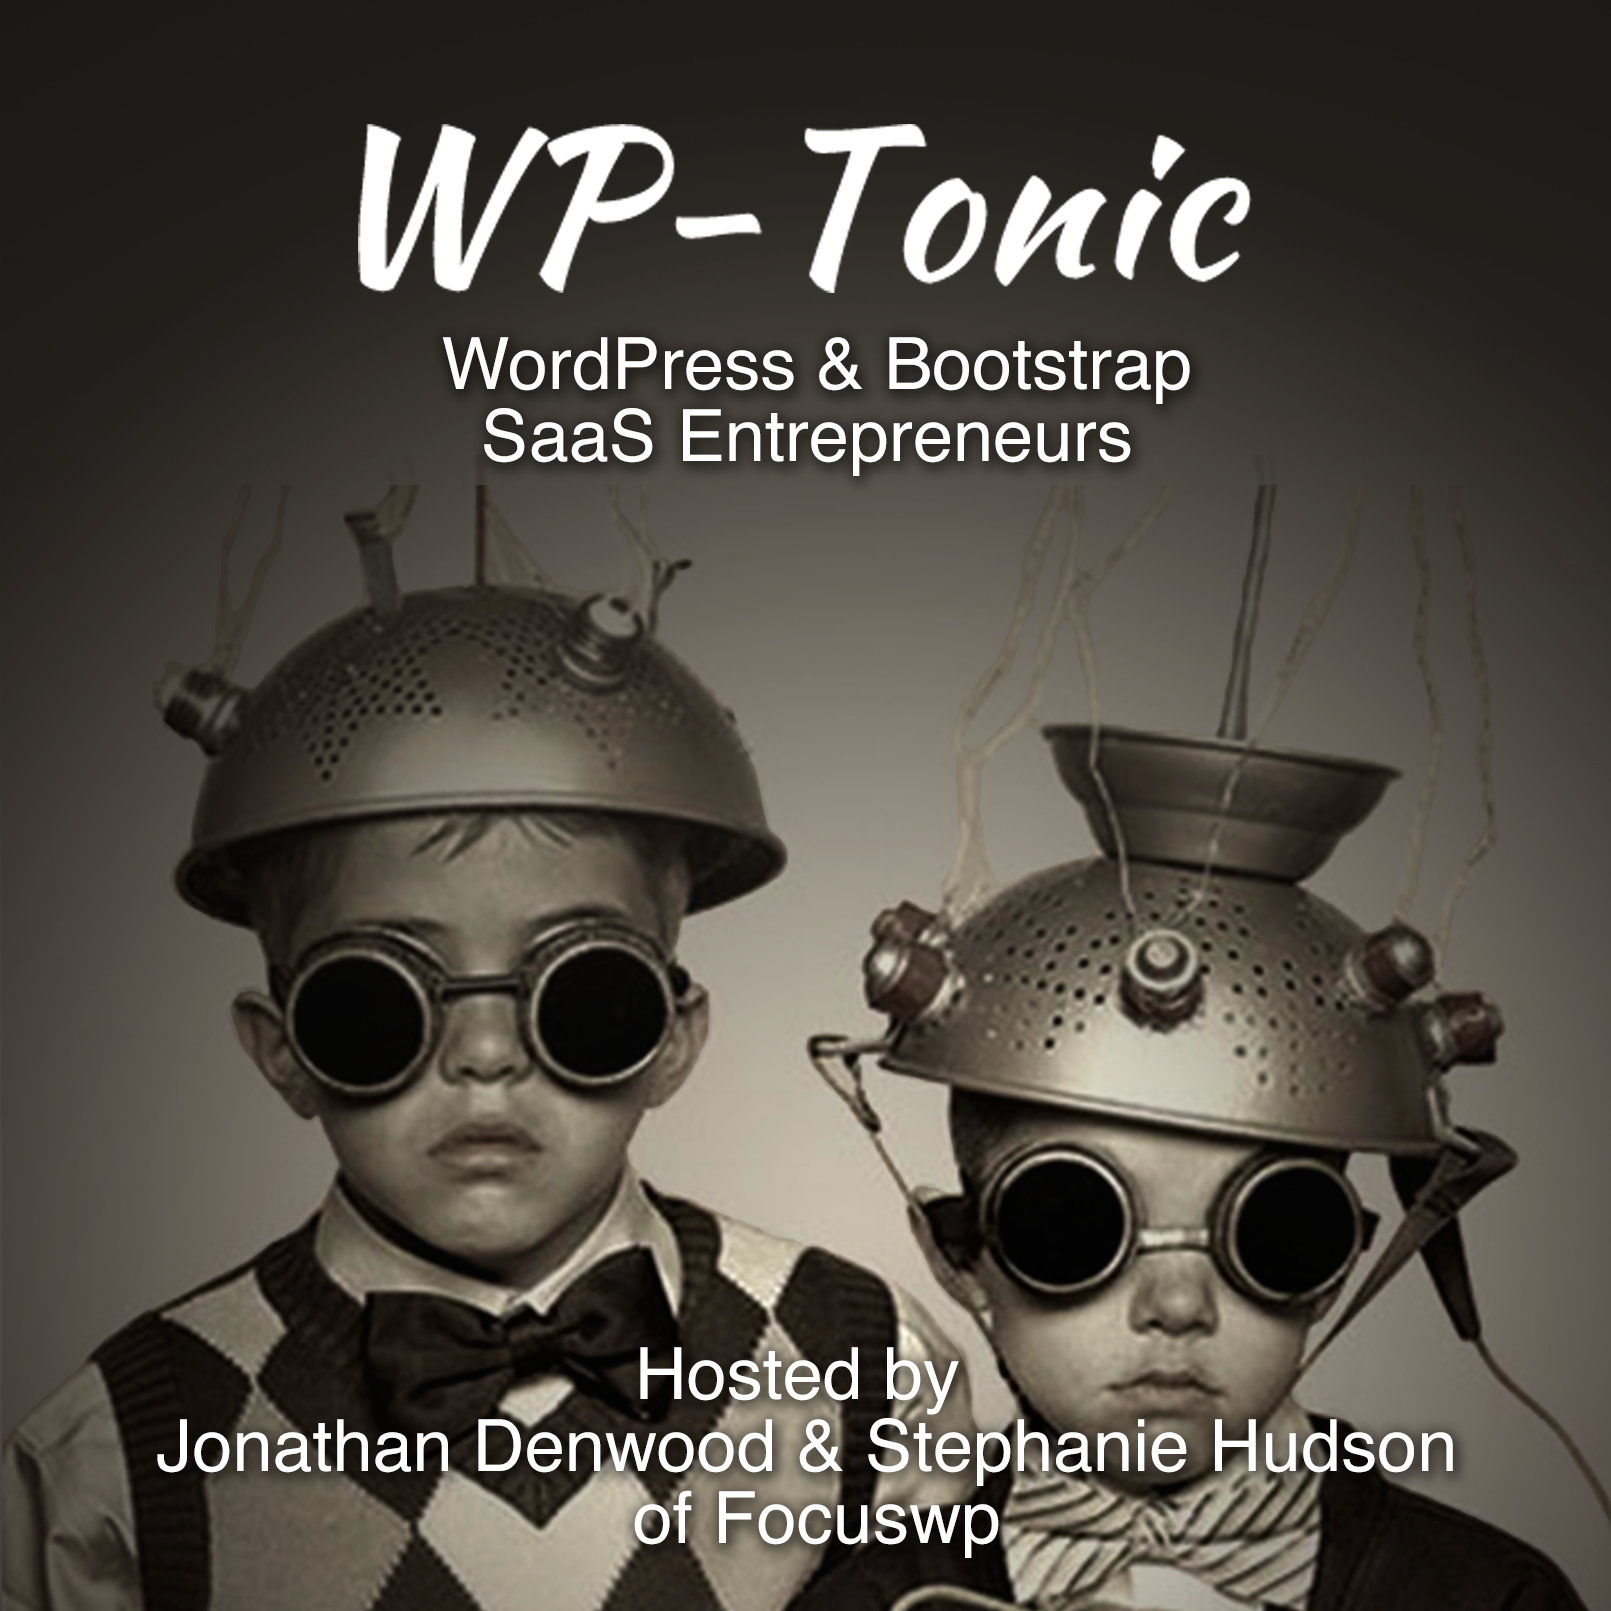 #726 WP-Tonic "This Week In WordPress & Tech" 9th of September, 2022 at 8:30 am PST 